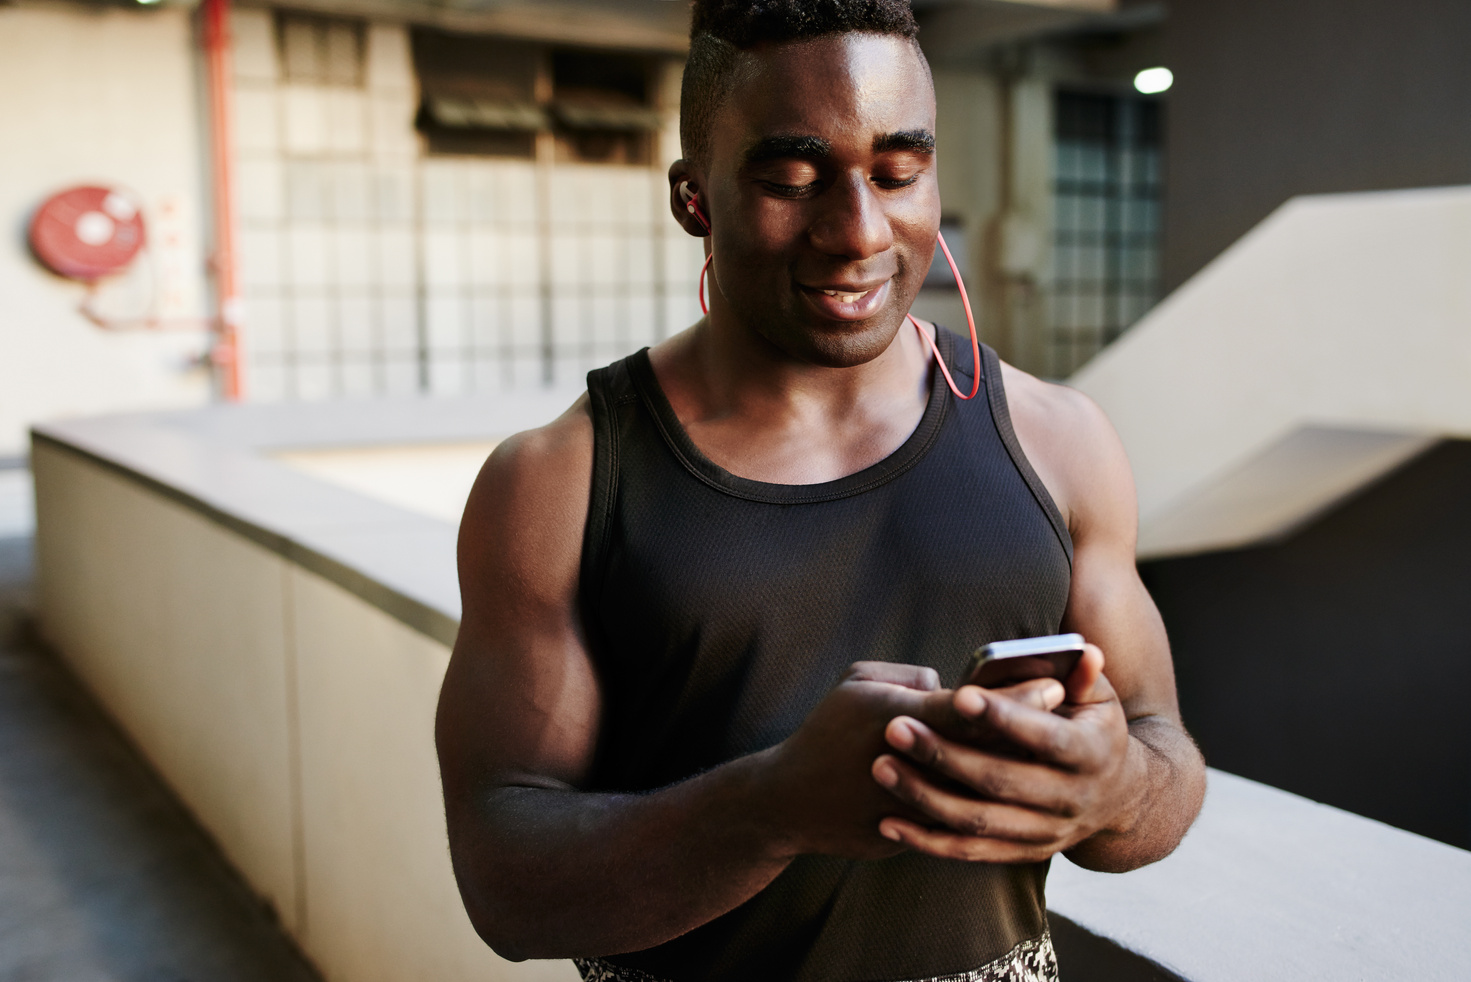 Taking his workouts up a notch with mobile apps